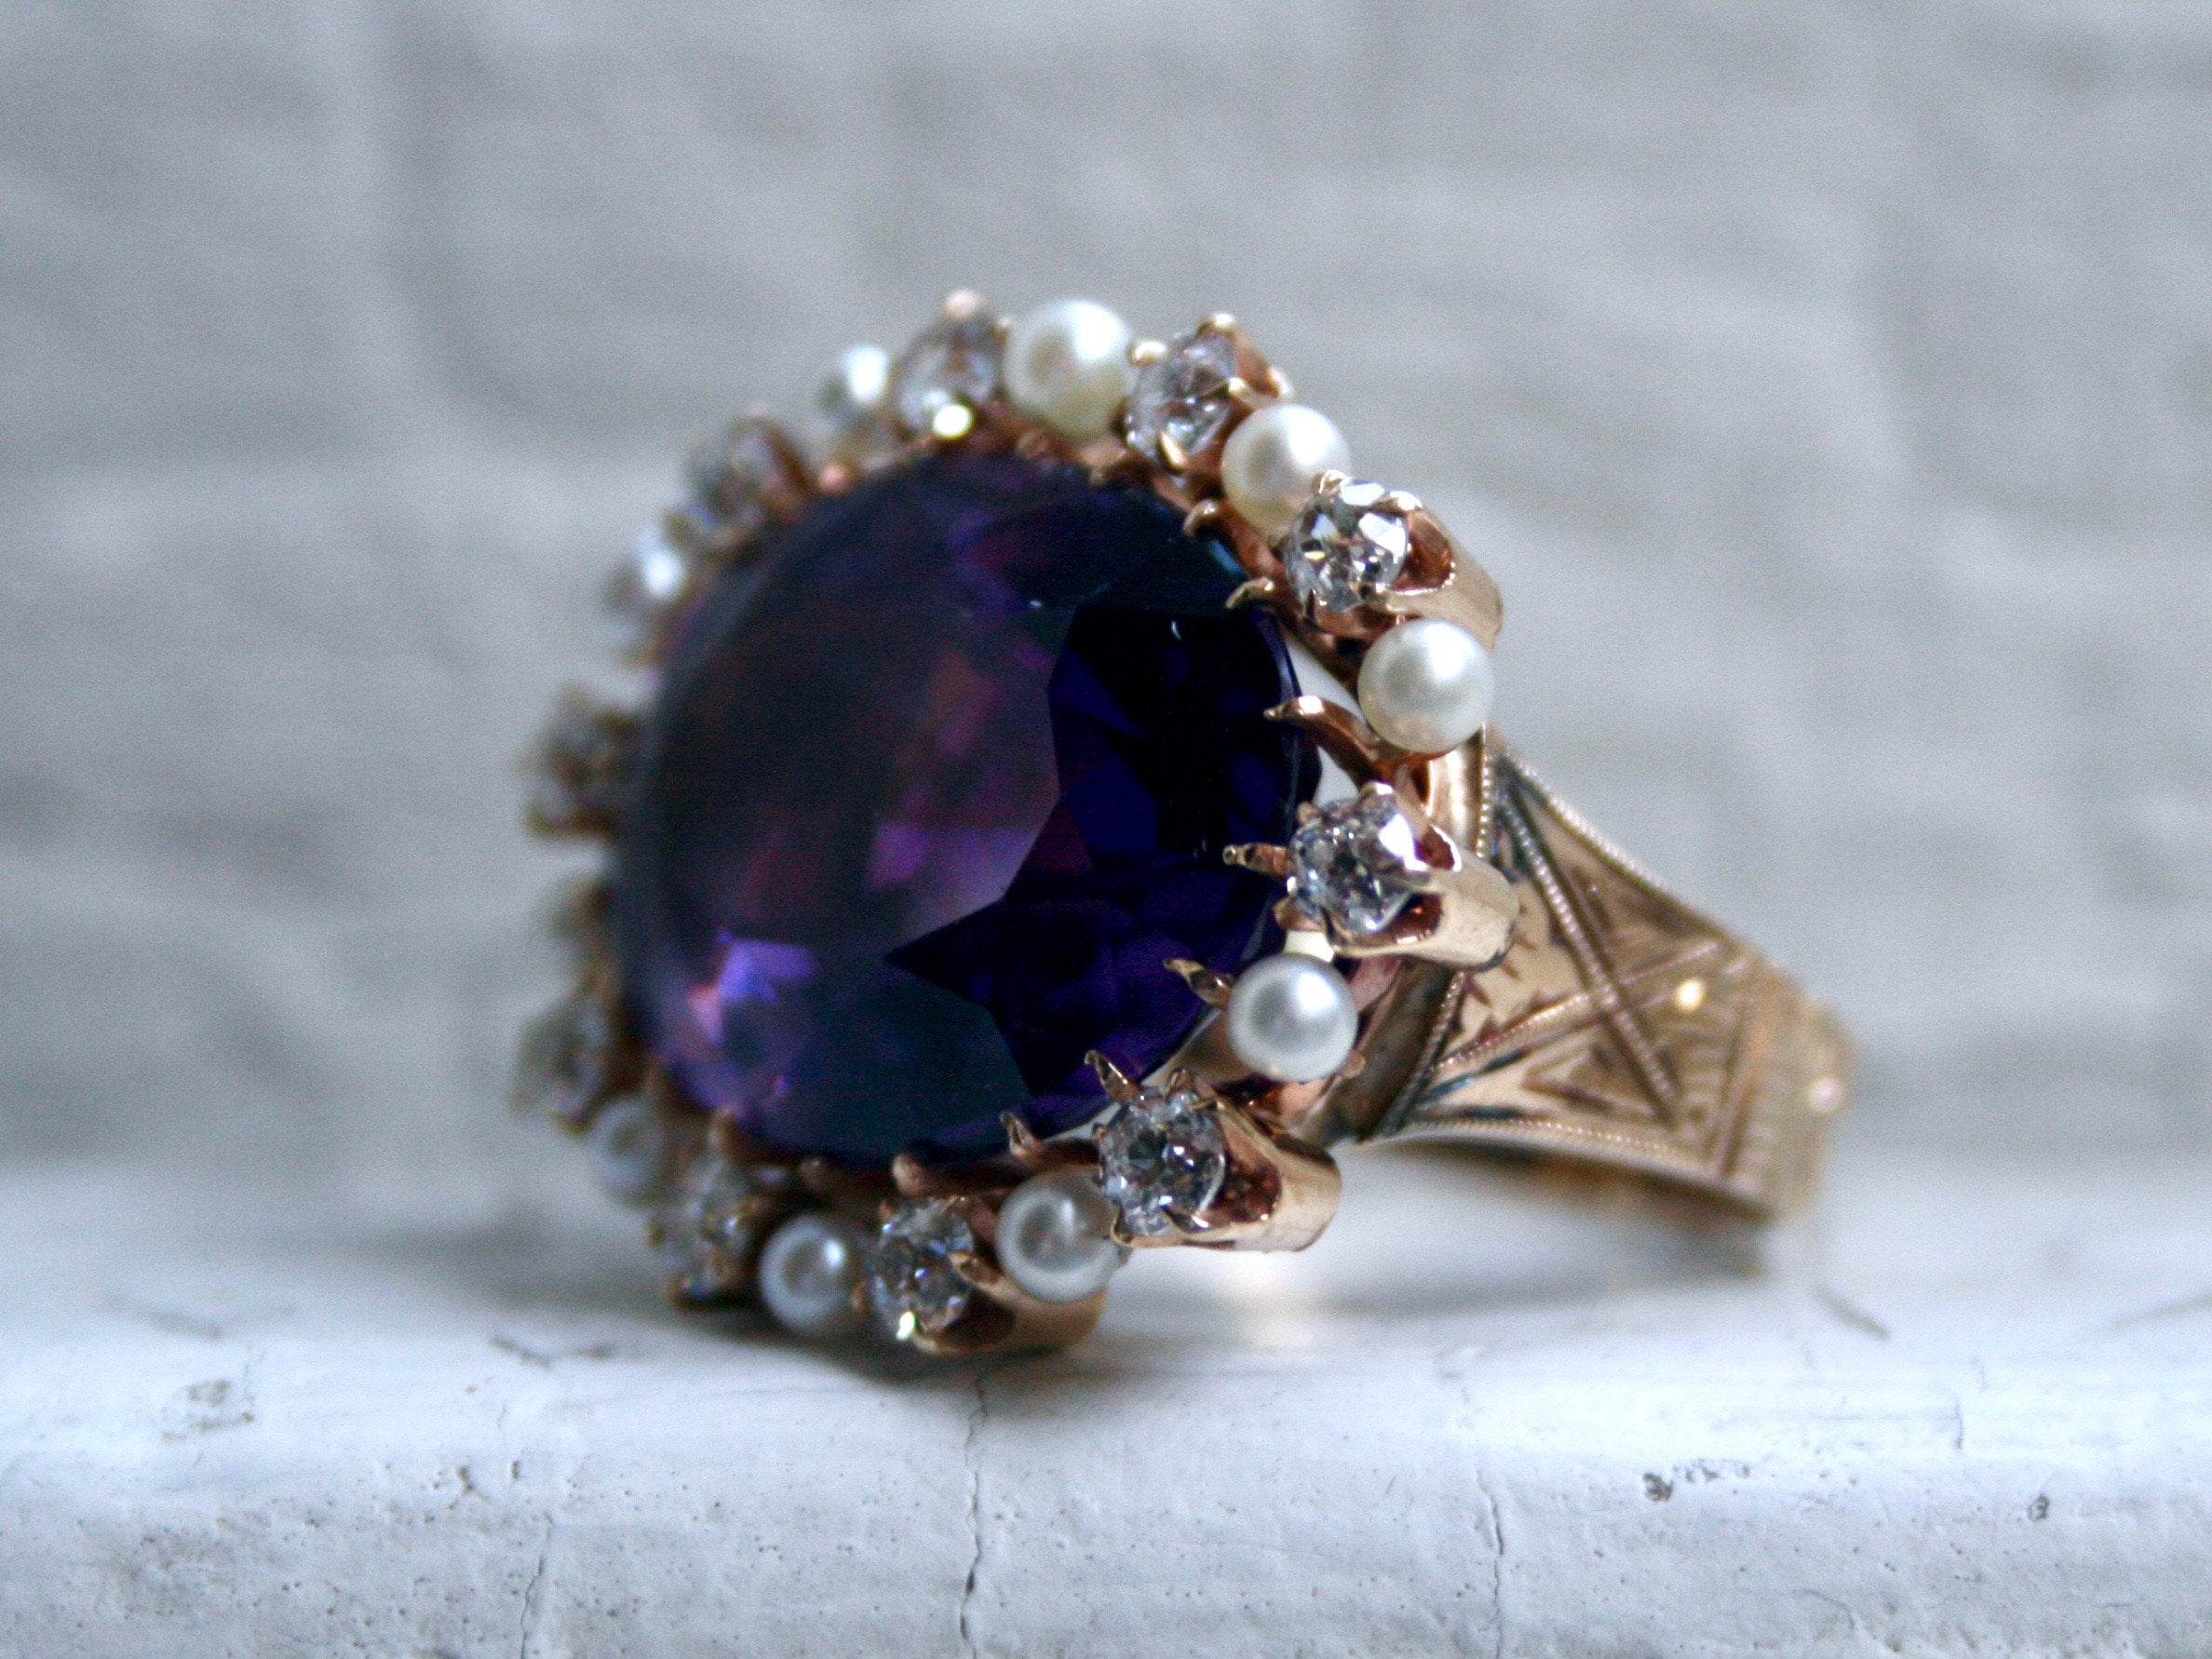 Outstanding Antique 14K Yellow Gold Amethyst Ring with Diamond and Pearl Halo - 15.70ct.